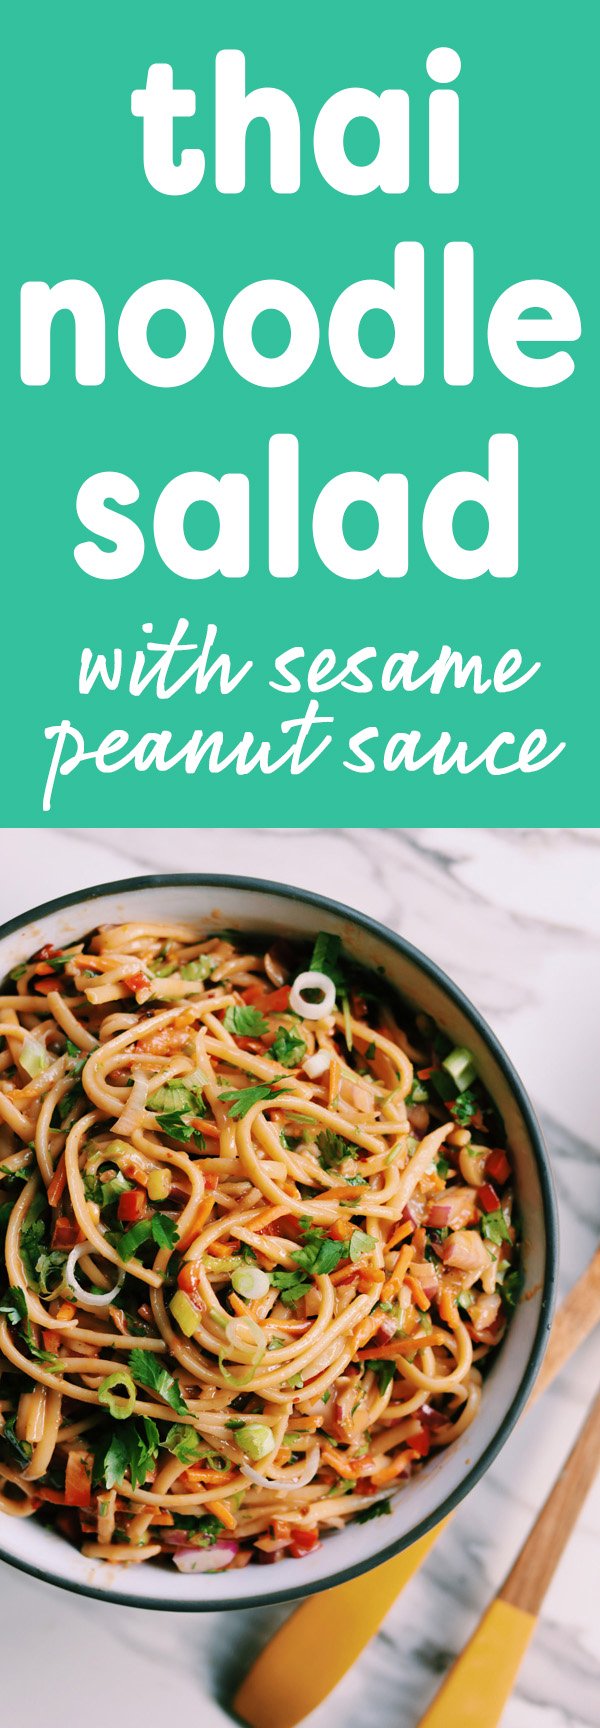 This crunchy Thai noodle salad is smothered in my favorite sesame peanut sauce. It’s easy to make and absolutely addicting to eat! You can serve these noodles cold or hot and add even more sriracha for a kick! #under30 #pastasalad #asian #thaifood #vegetarian #noodles #peanutsauce #thainoodlesalad